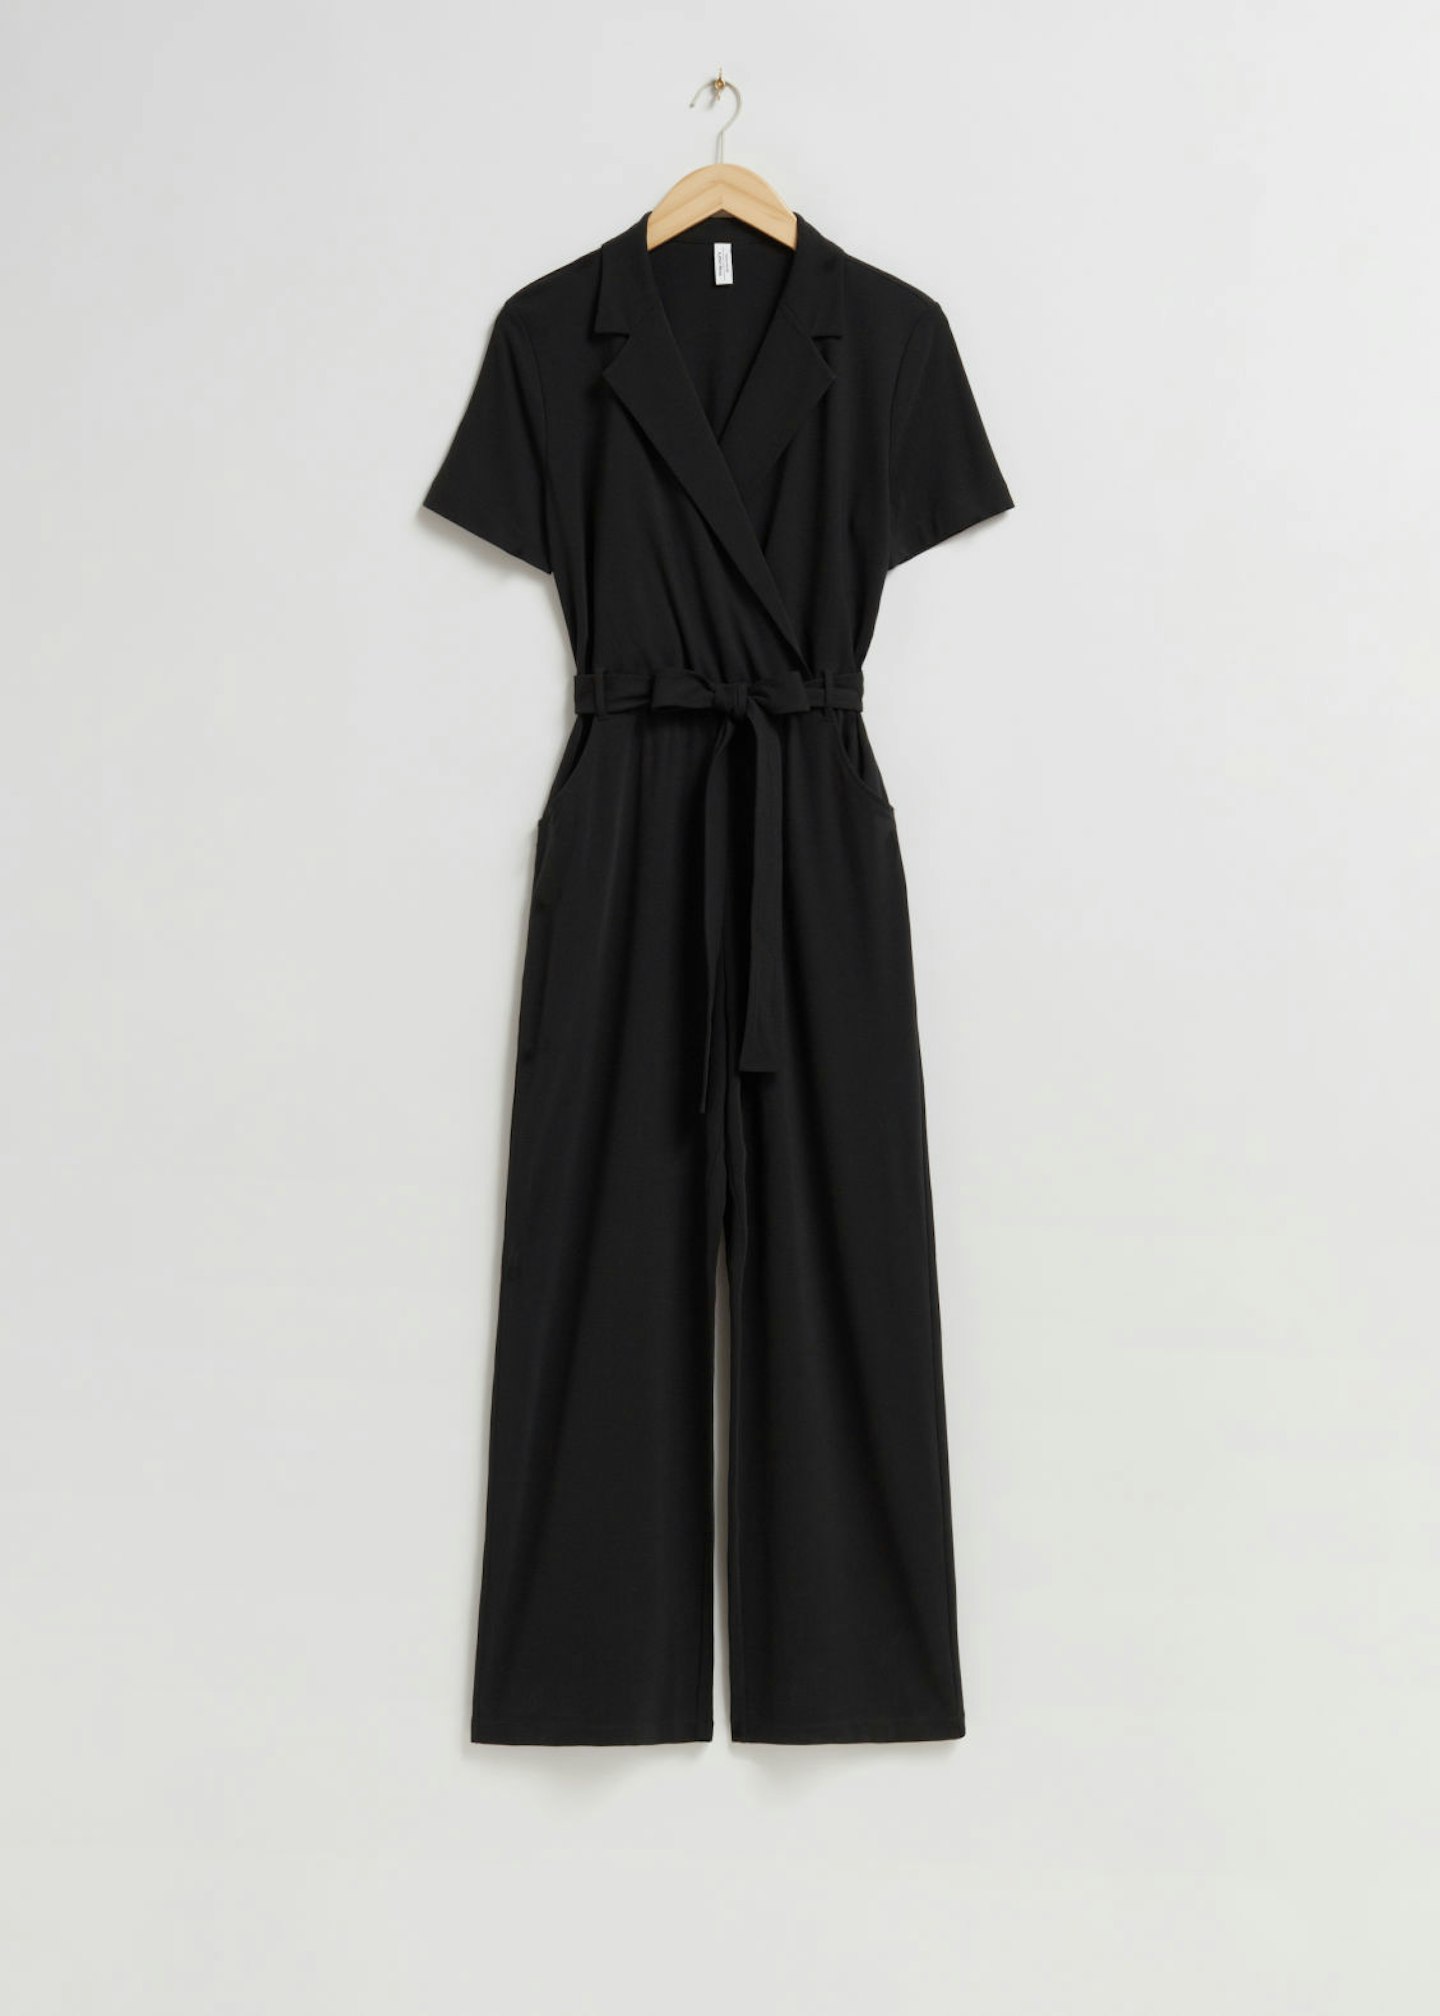 & Other Stories, Belted Jumpsuit